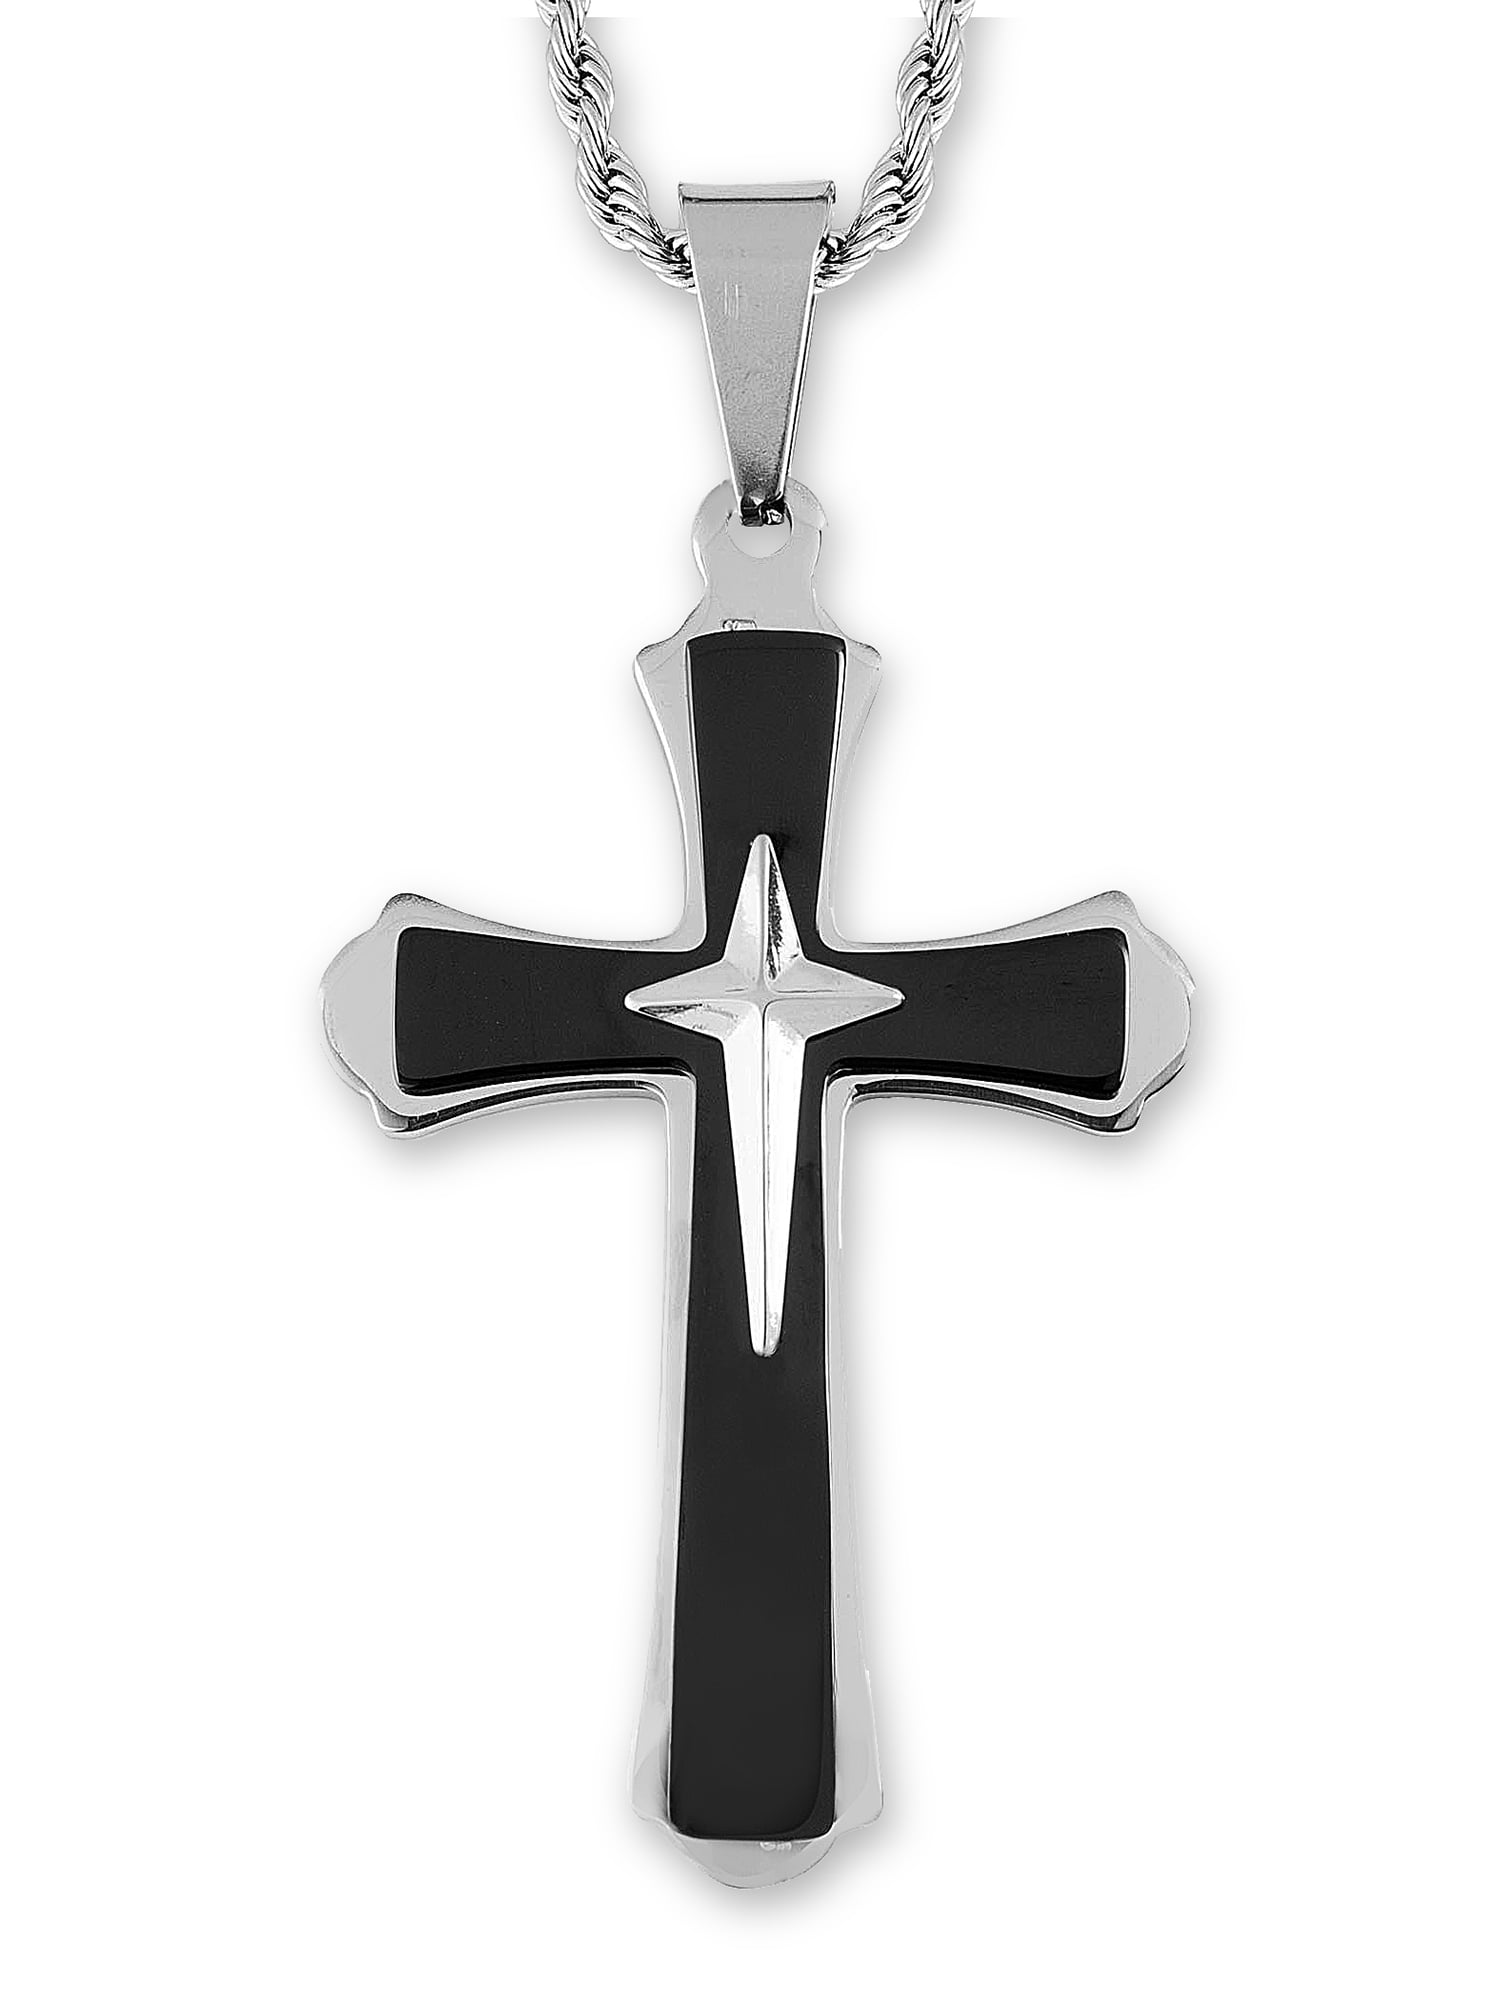 30mm Stainless Steel Cross Pendant & 3mm Black Leather Necklace 16" 18" 20" etc